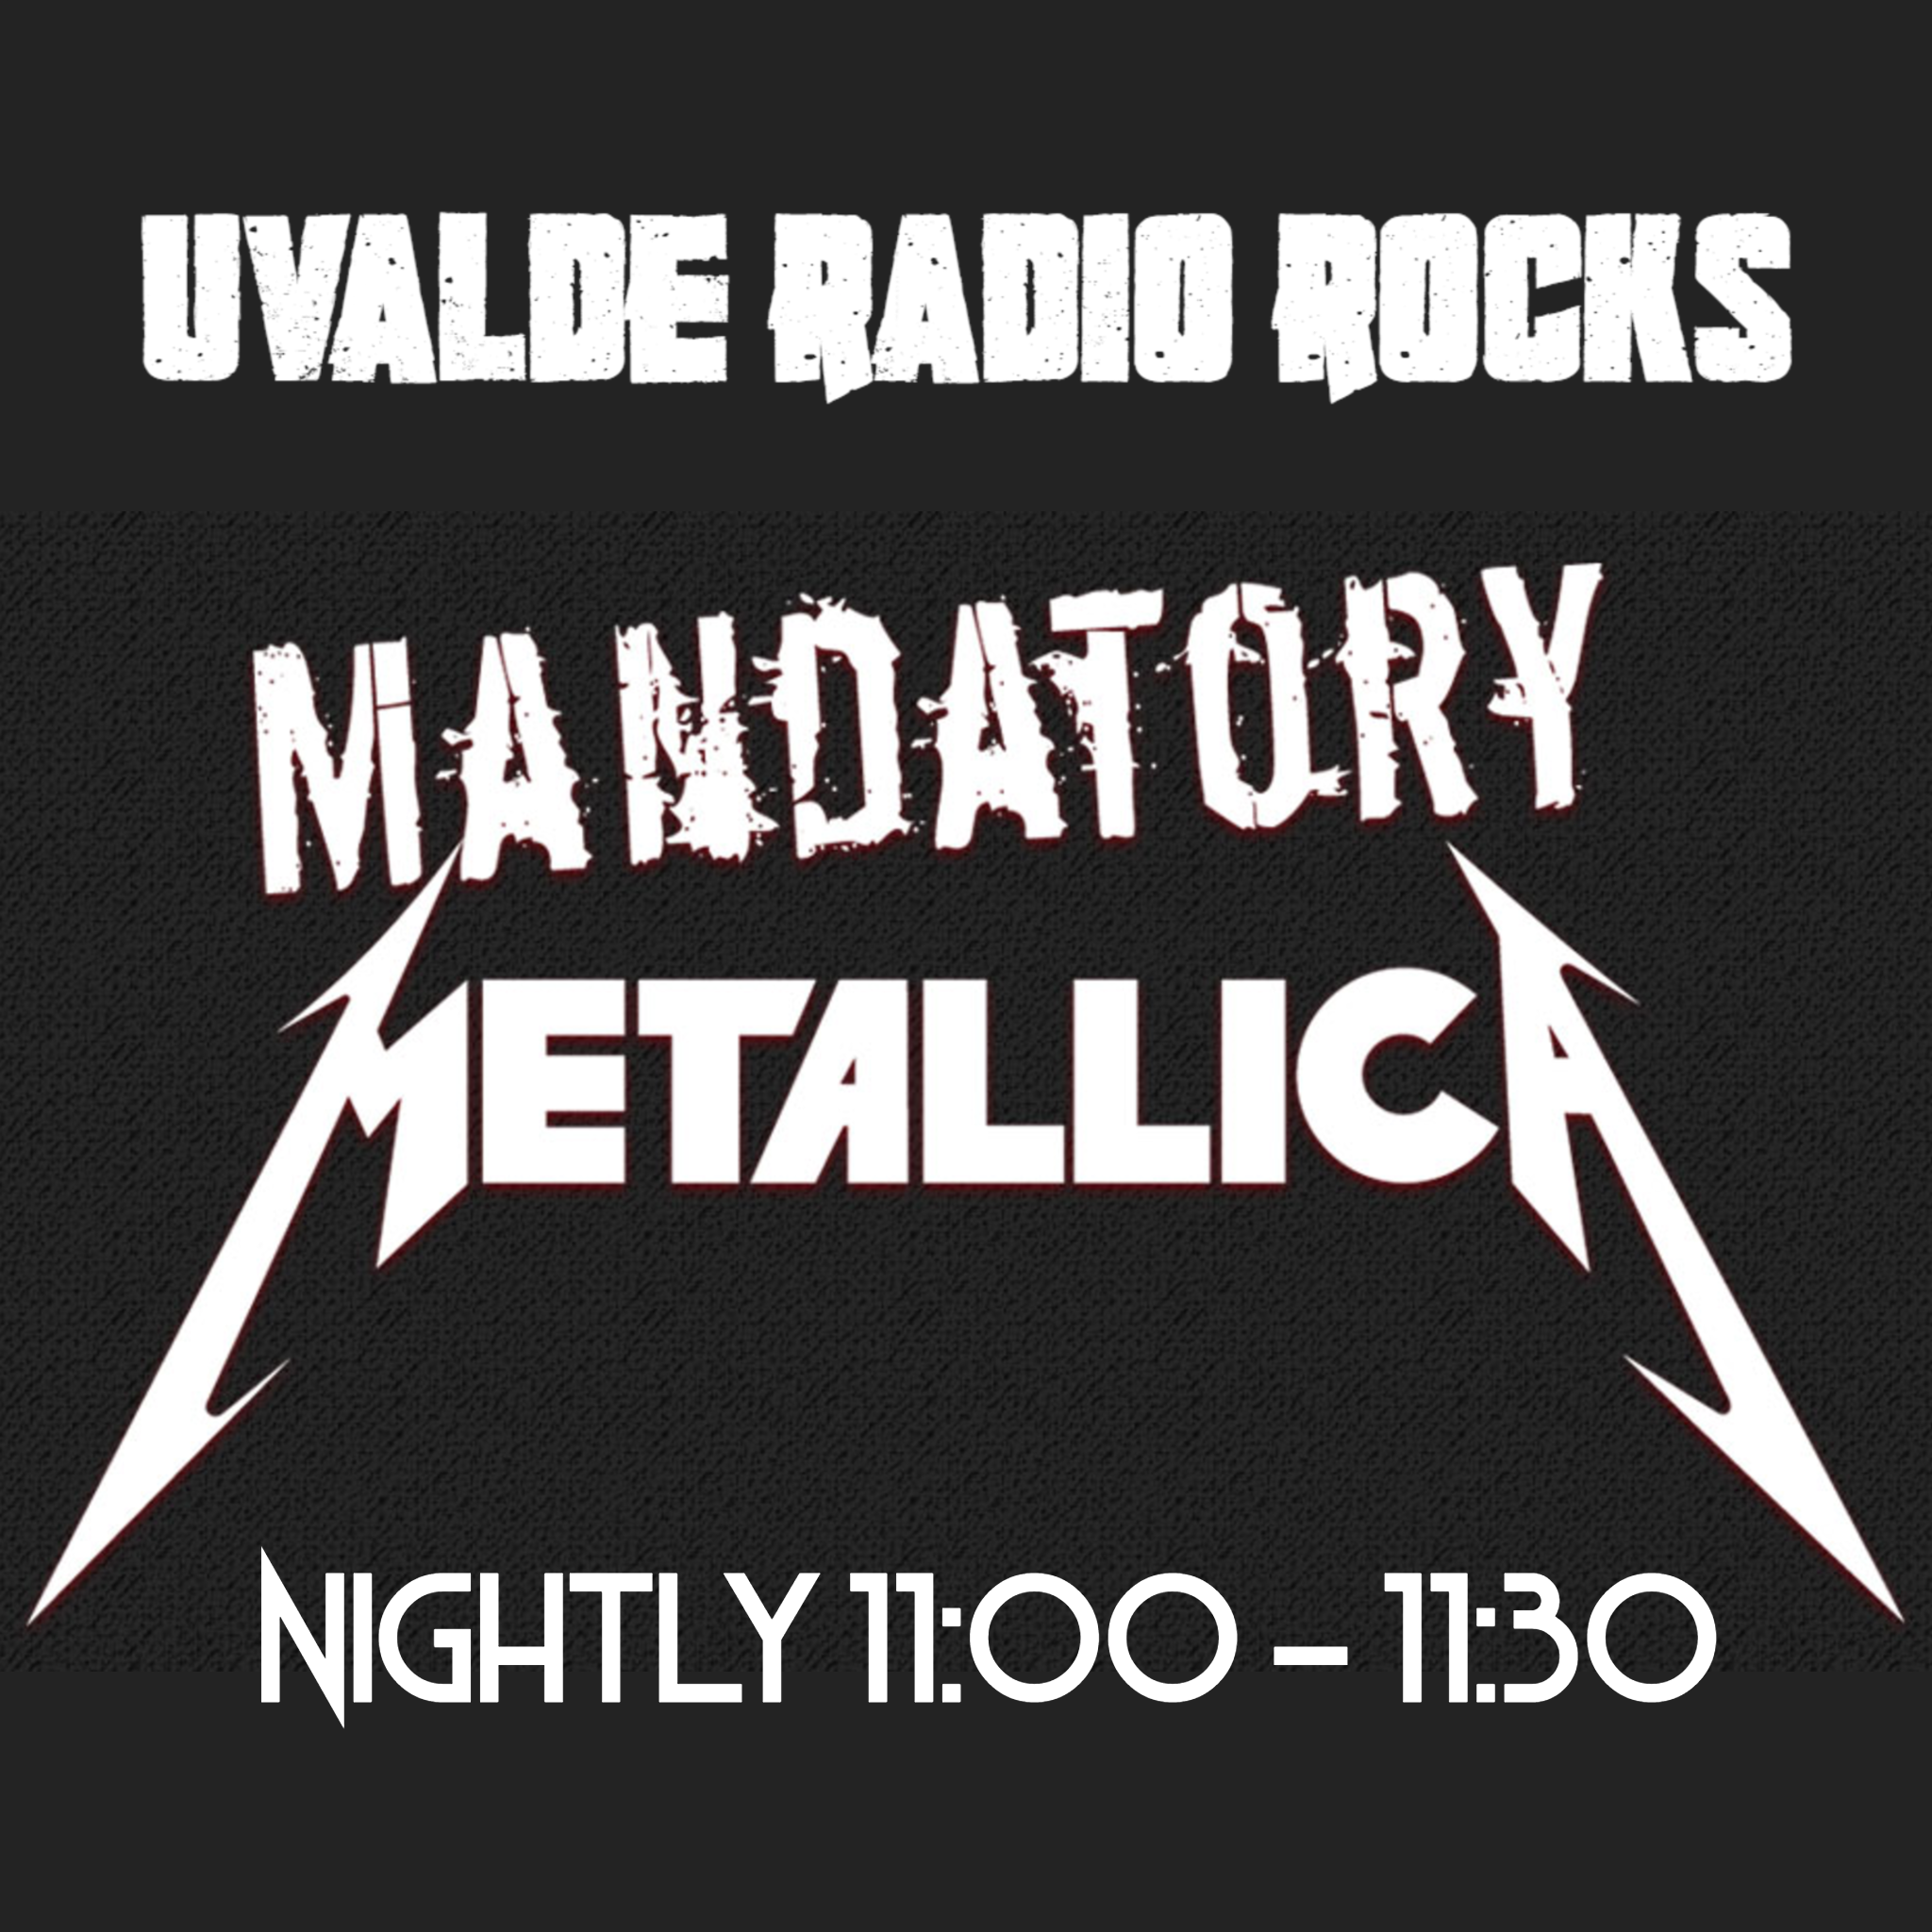 Art for Mandatory Metallica Promo by Every Night at 11:00